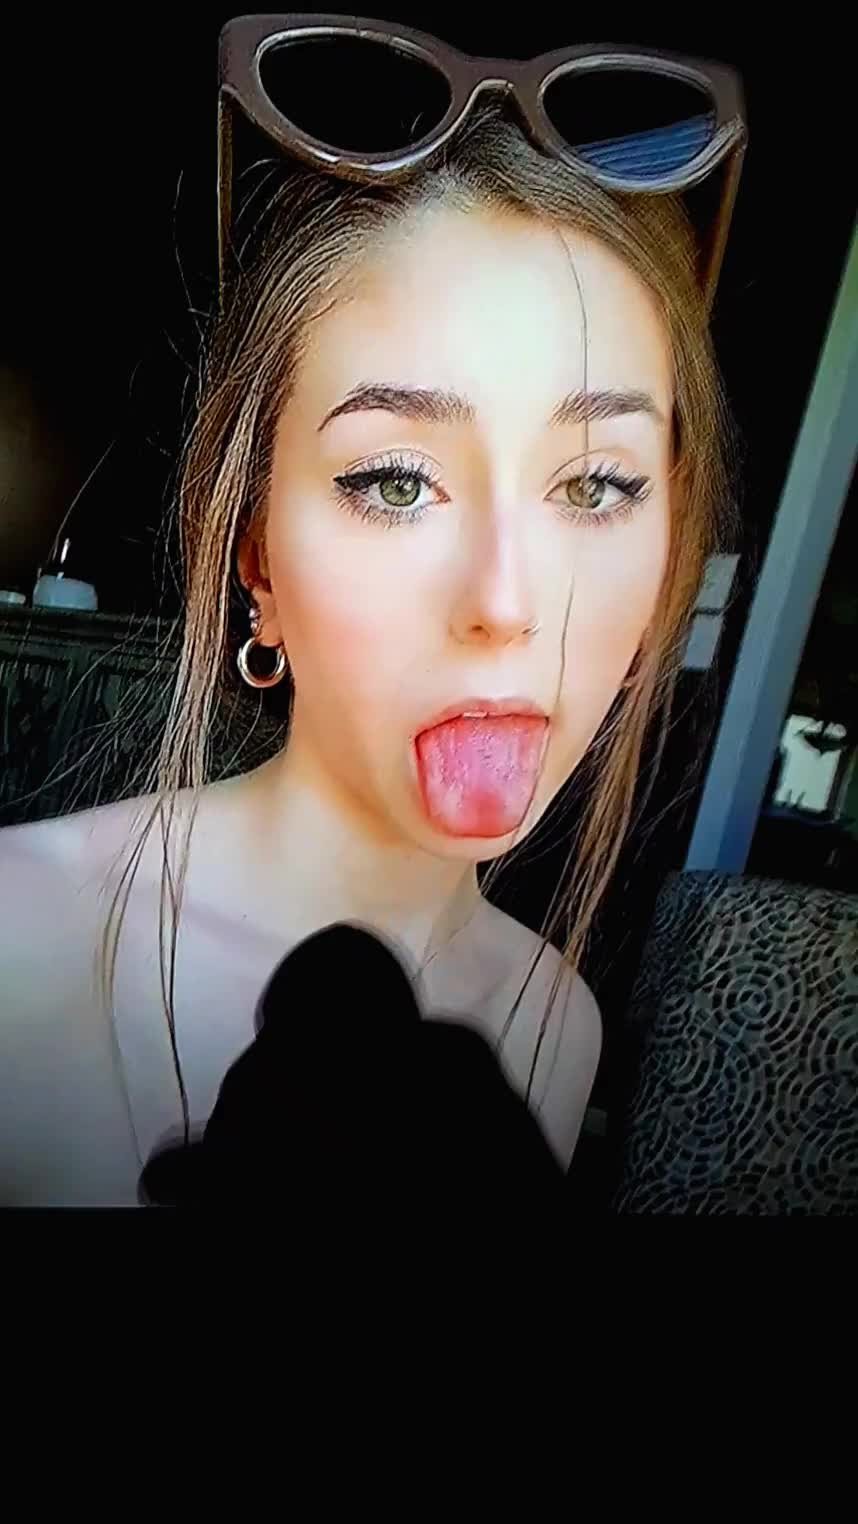 Watch the Video by LemmeTribute with the username @LemmeTribute, posted on February 7, 2022. The post is about the topic Cum tributes.